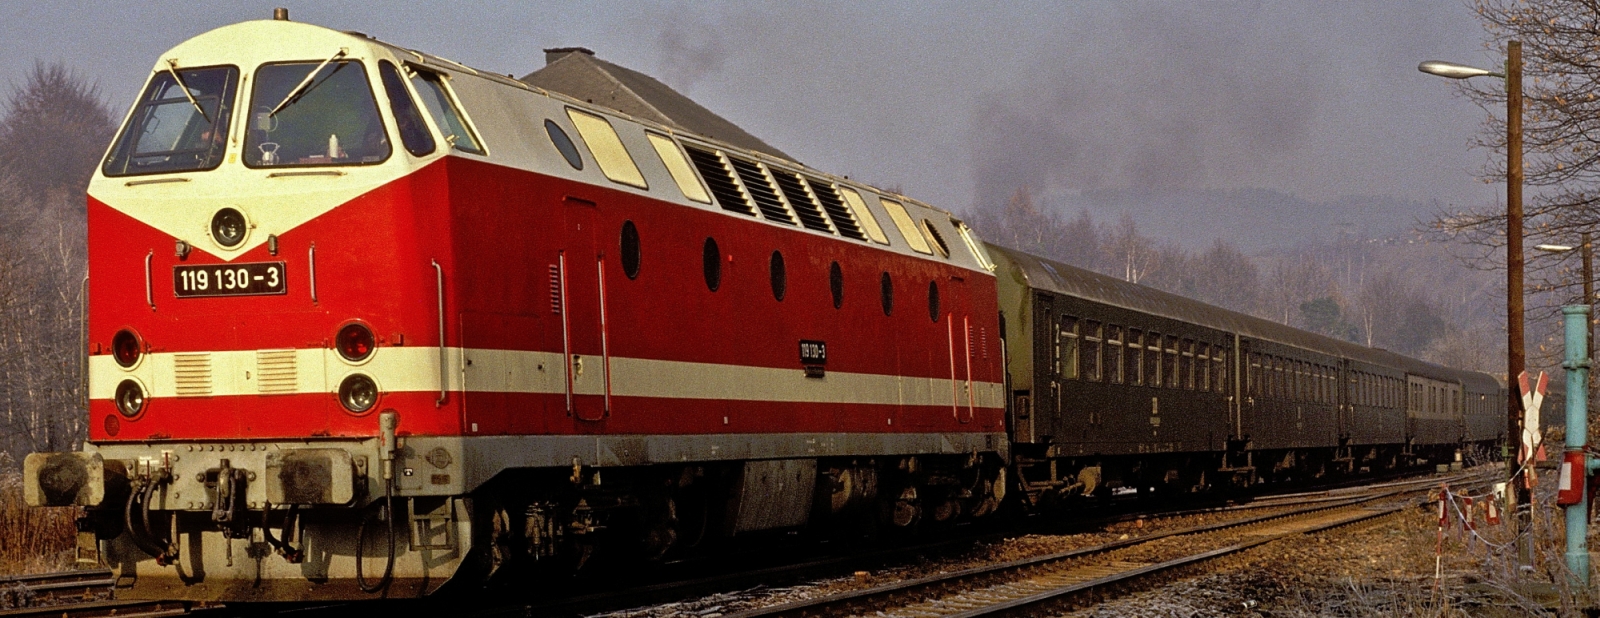 119 130 in December 1991 with a regional train made up of Rekowagen in Aue